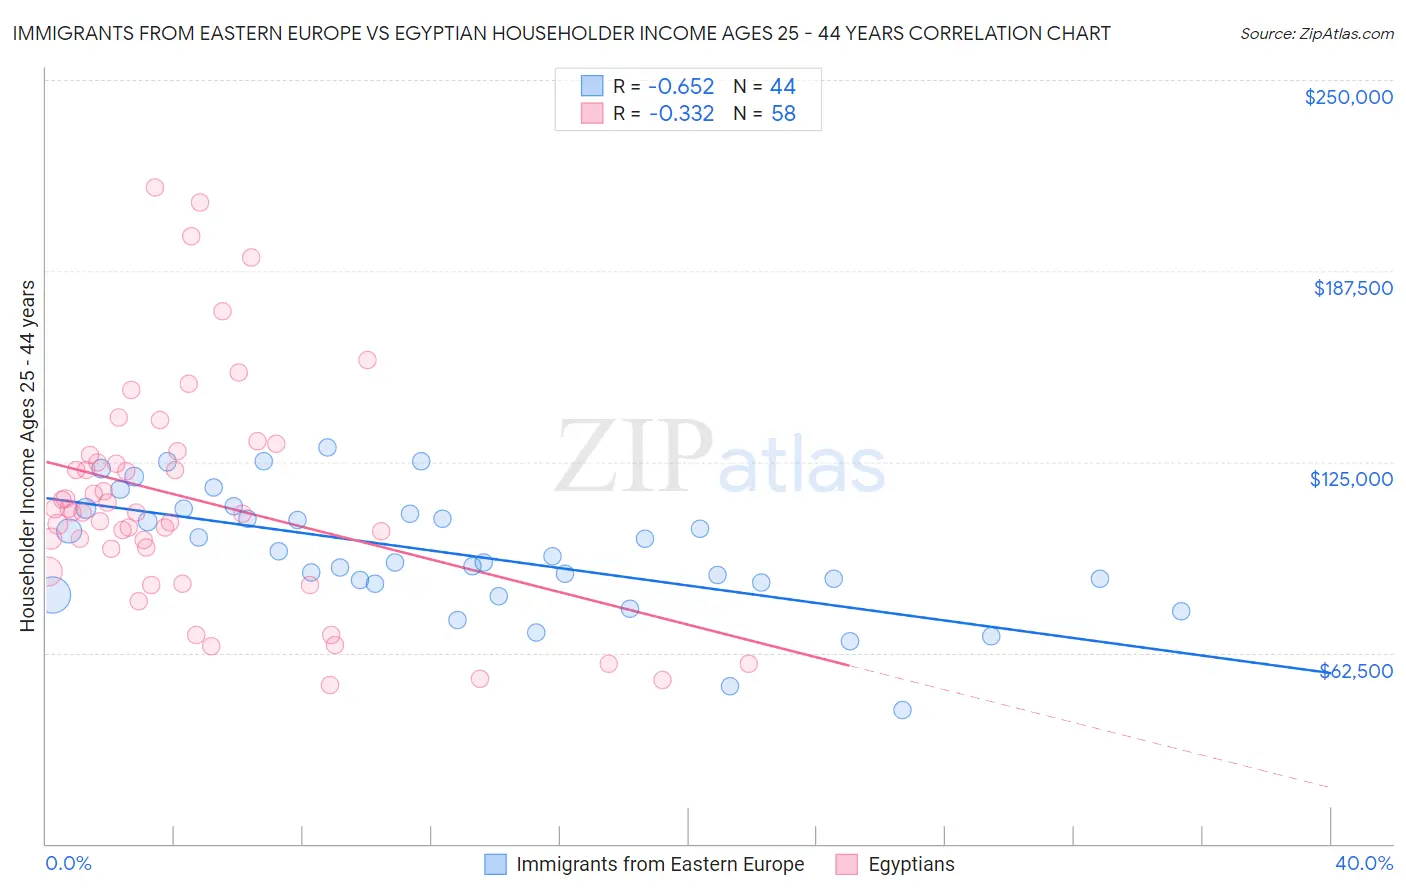 Immigrants from Eastern Europe vs Egyptian Householder Income Ages 25 - 44 years